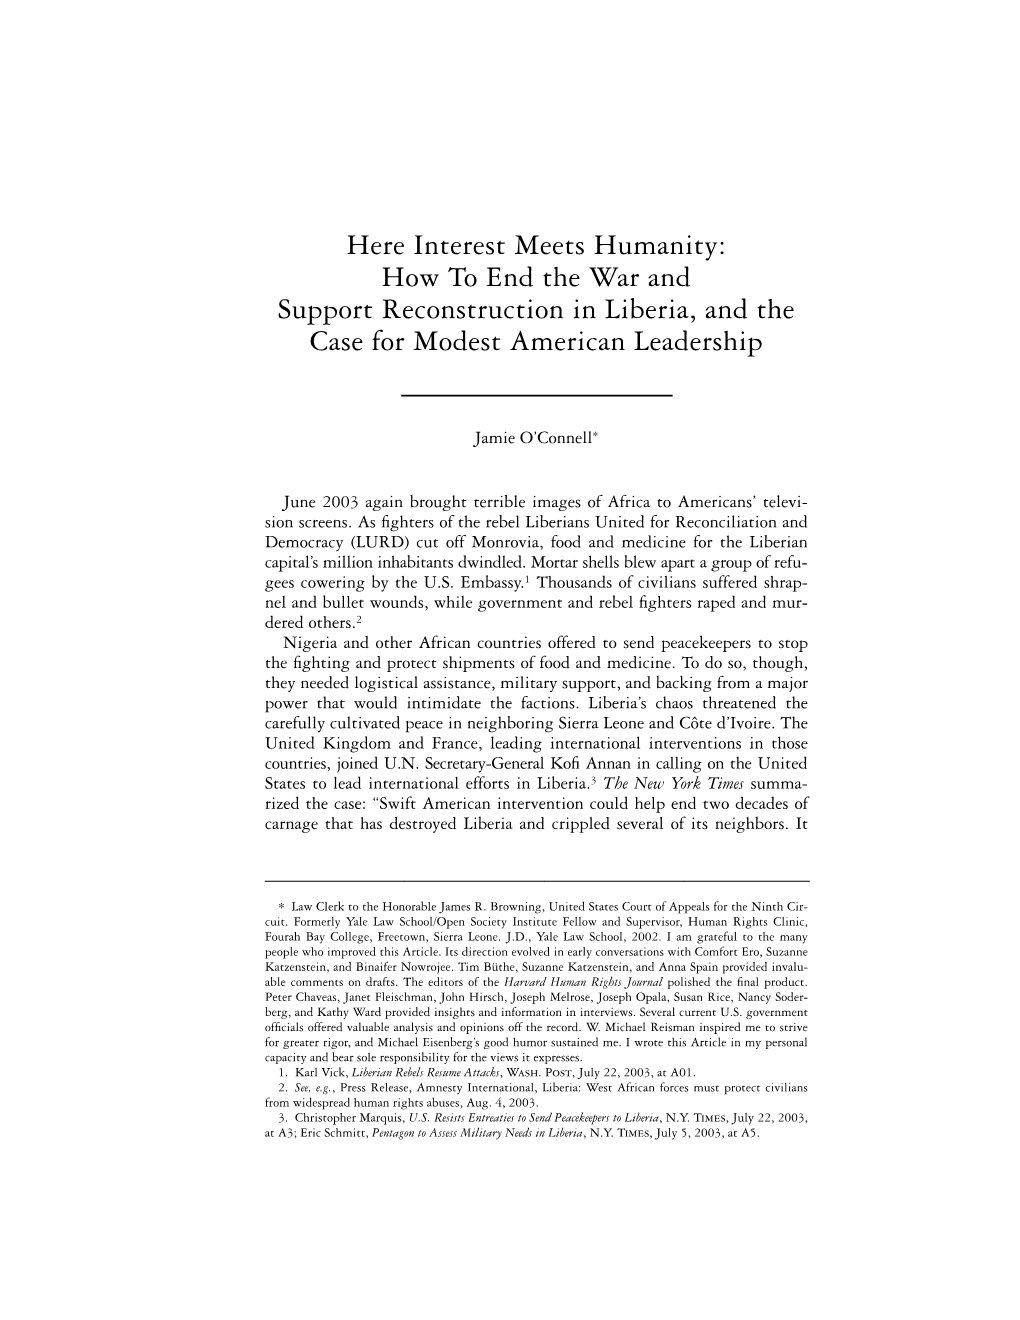 Here Interest Meets Humanity: How to End the War and Support Reconstruction in Liberia, and the Case for Modest American Leadership